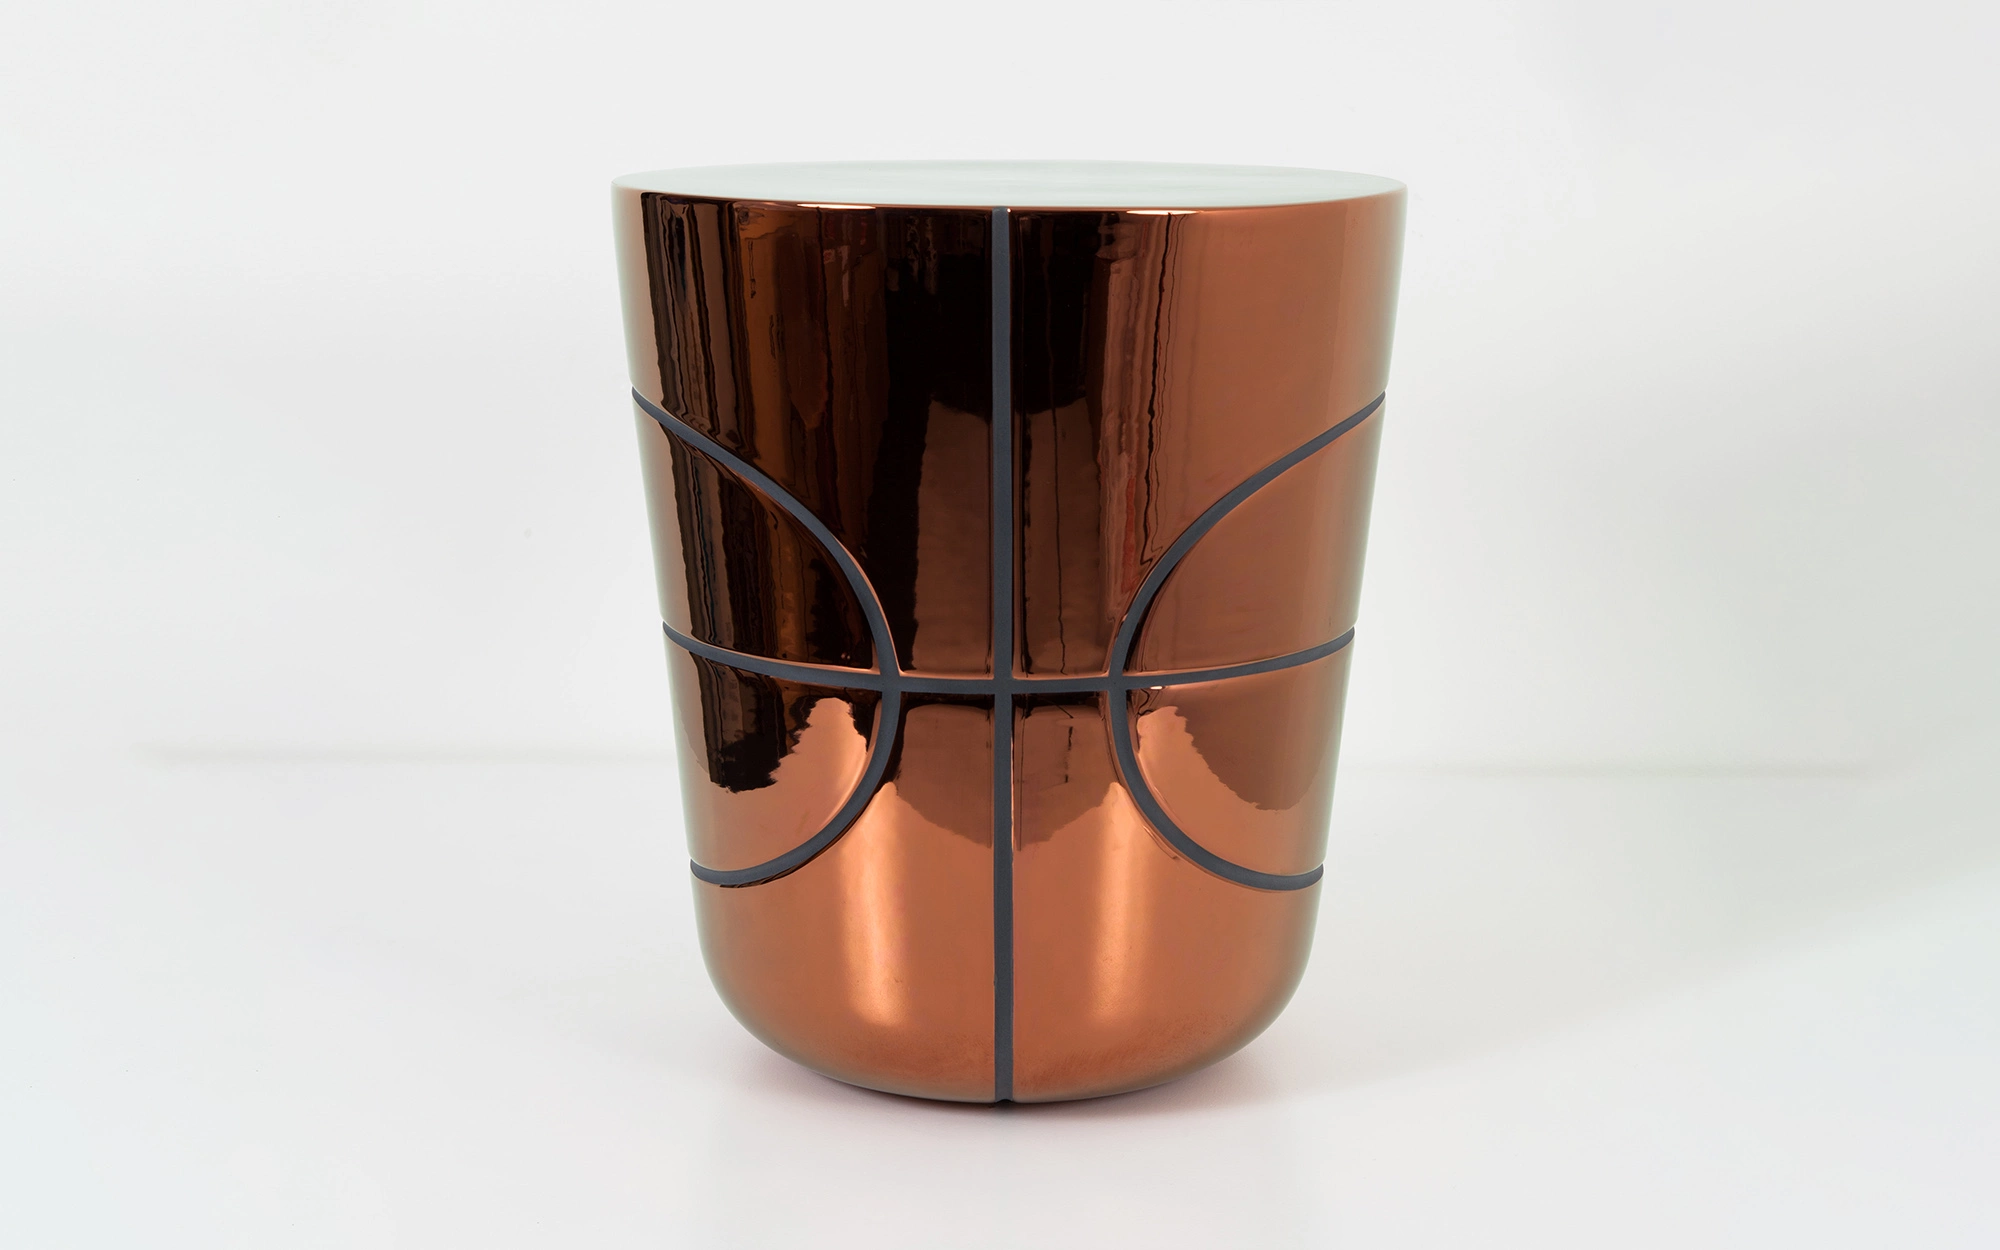 Game On Side Table - Copper Ceramic - Jaime Hayon - Wall light - Galerie kreo